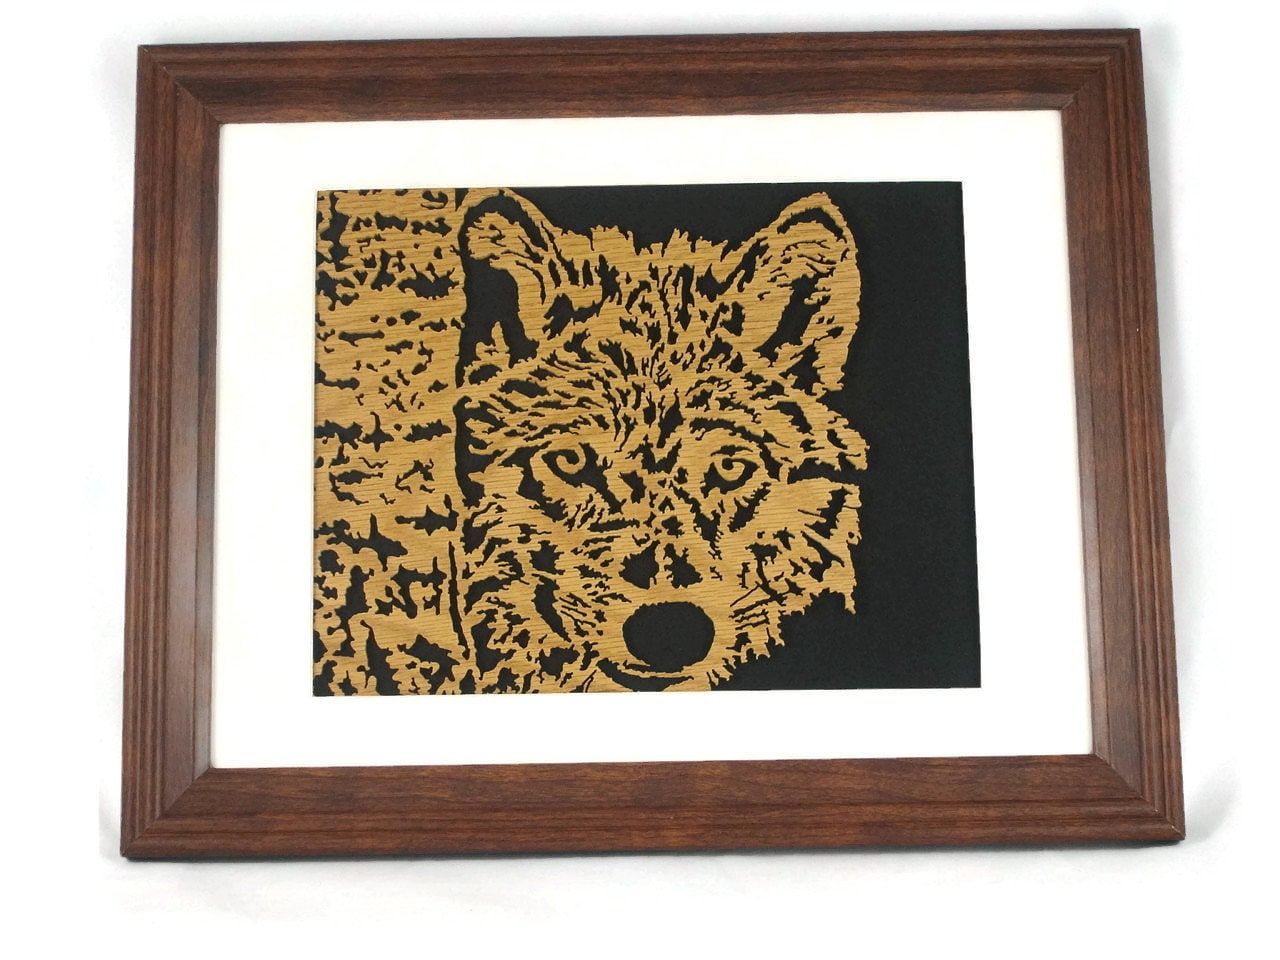 Oak Wood Wall Art With Widely Used Wolf Framed Wood Wall Hanging Art Decor Handmade From  (View 6 of 20)